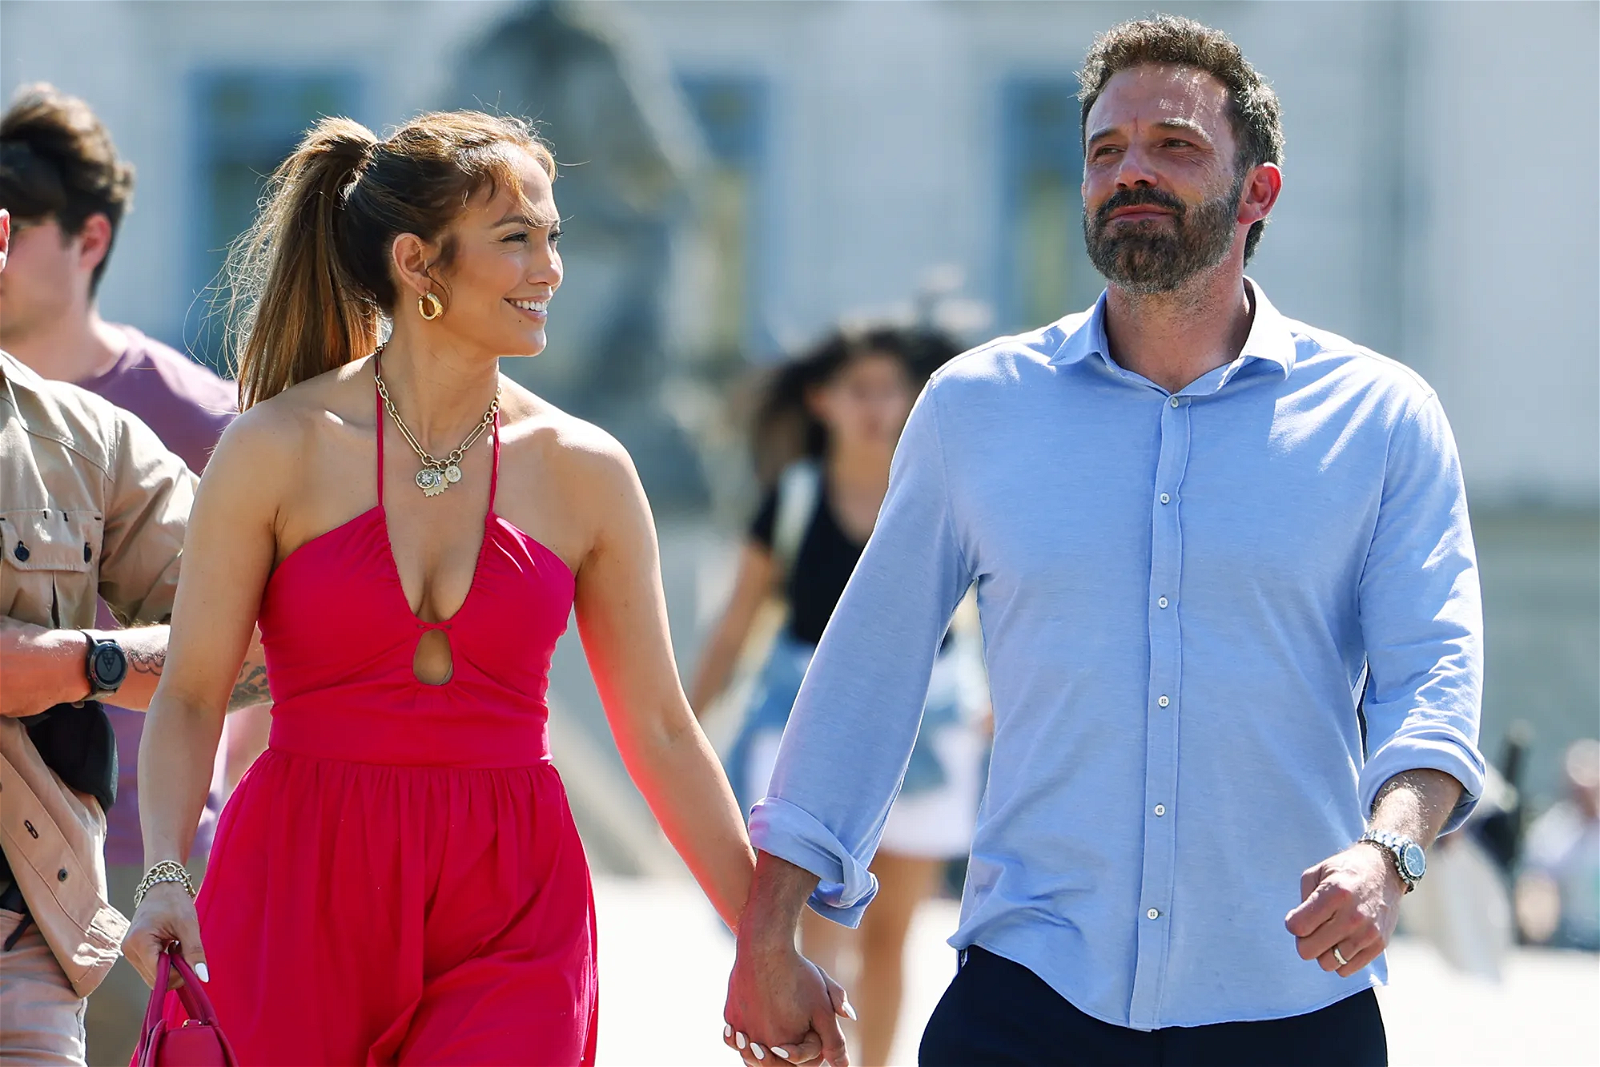 Ben Affleck and Jennifer Lopez’s $61M Mansion Comes With Troubled Past ...